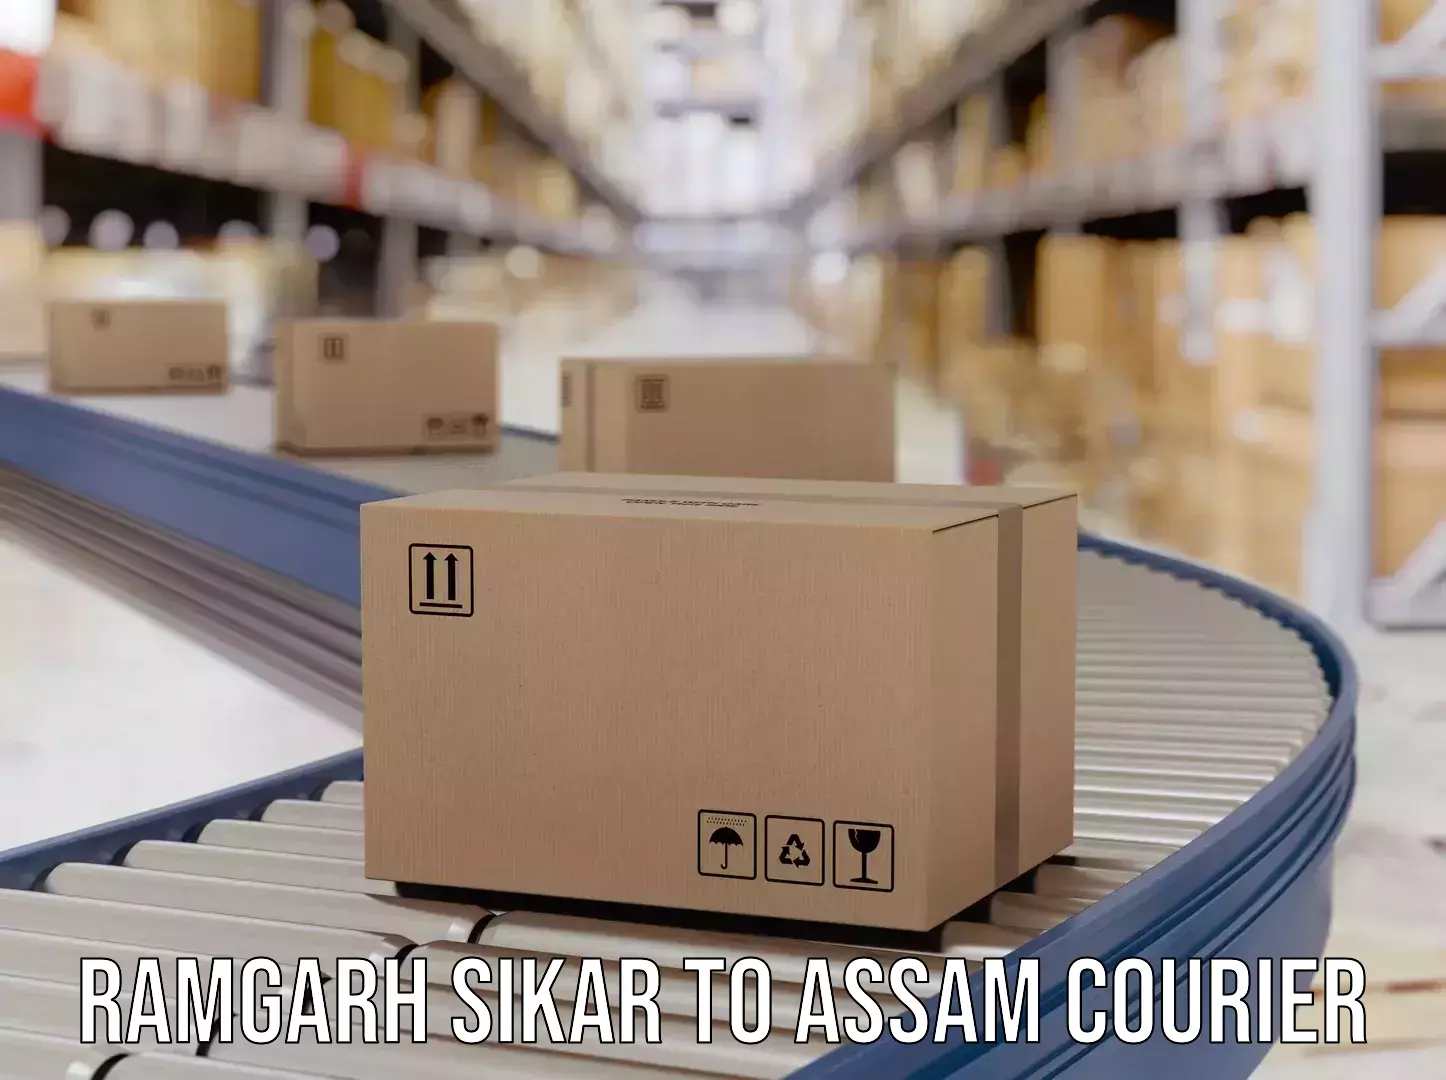 Personalized courier experiences Ramgarh Sikar to Bhaga